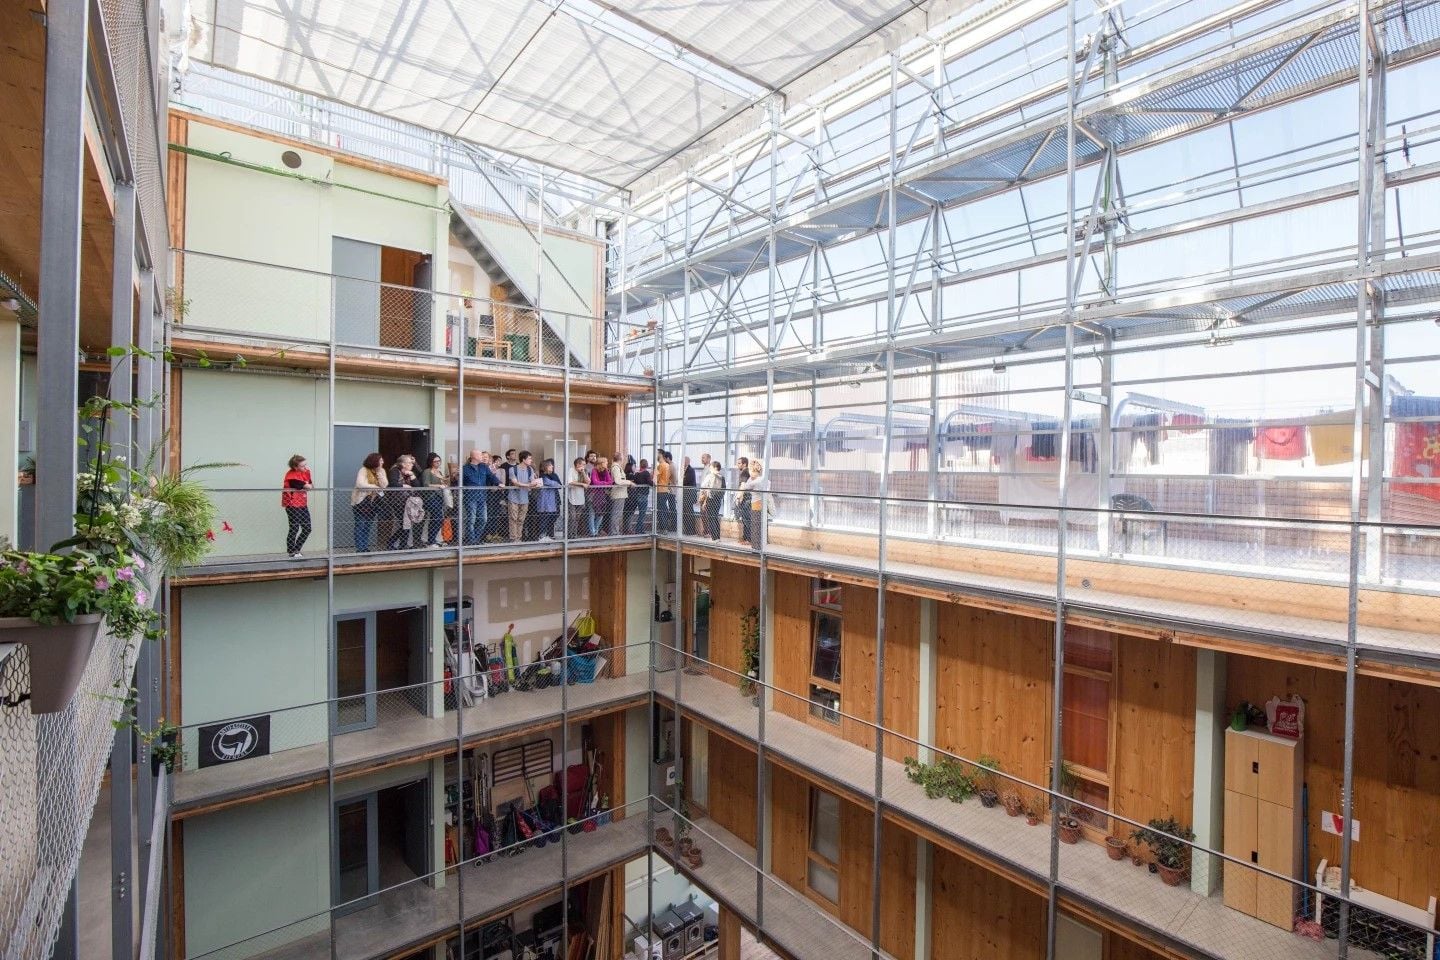 La Borda residents gather on the building's fourth floor overlooking the central courtyard.